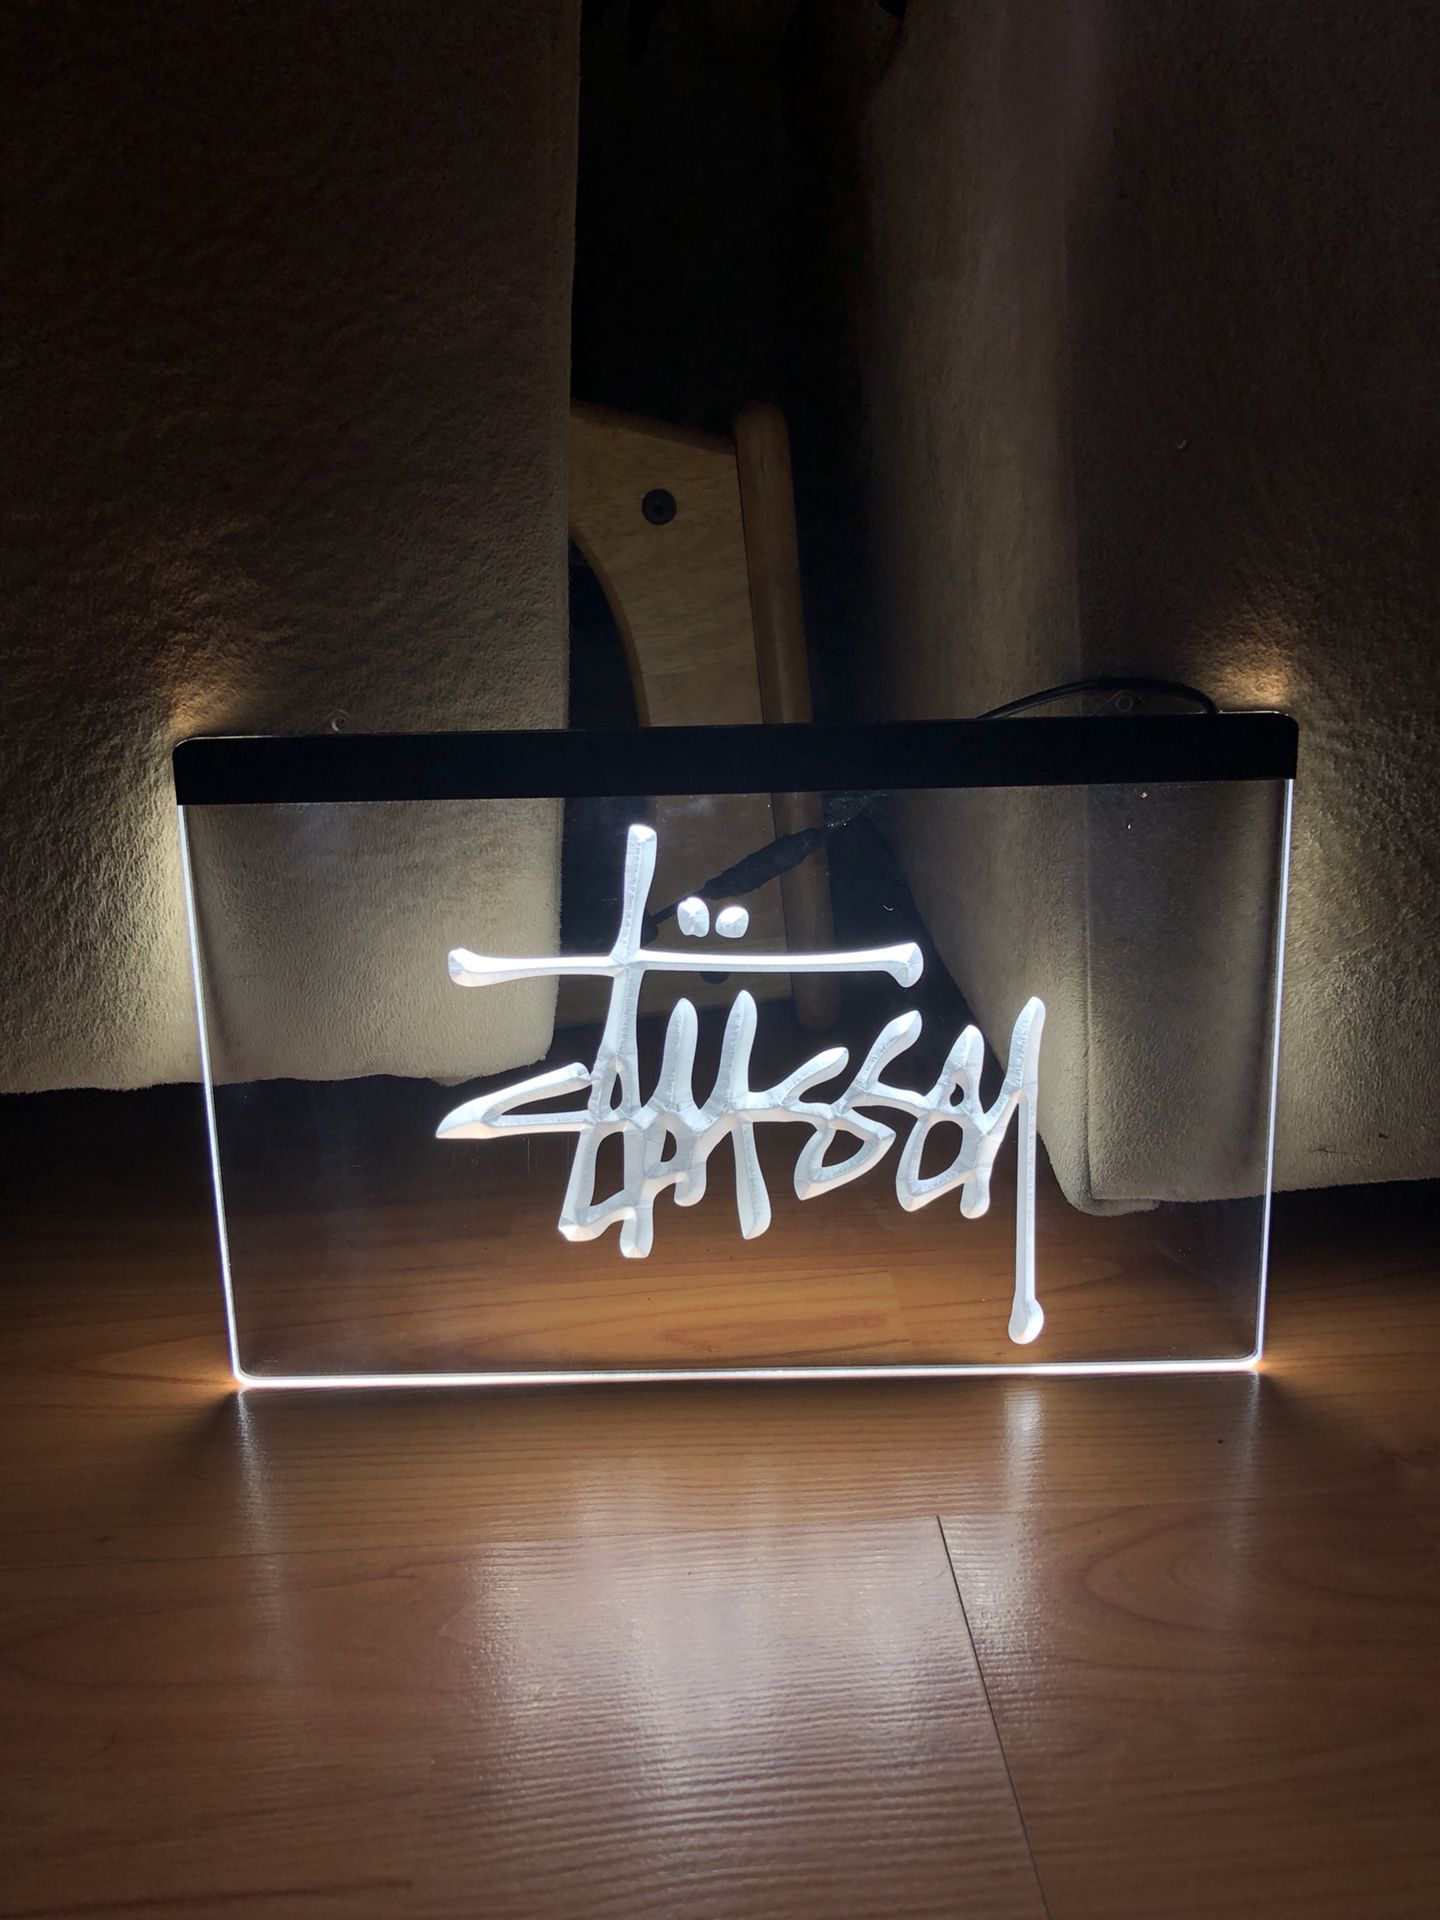 Other, Louis Vuitton Led Neon Light Sign 8x12